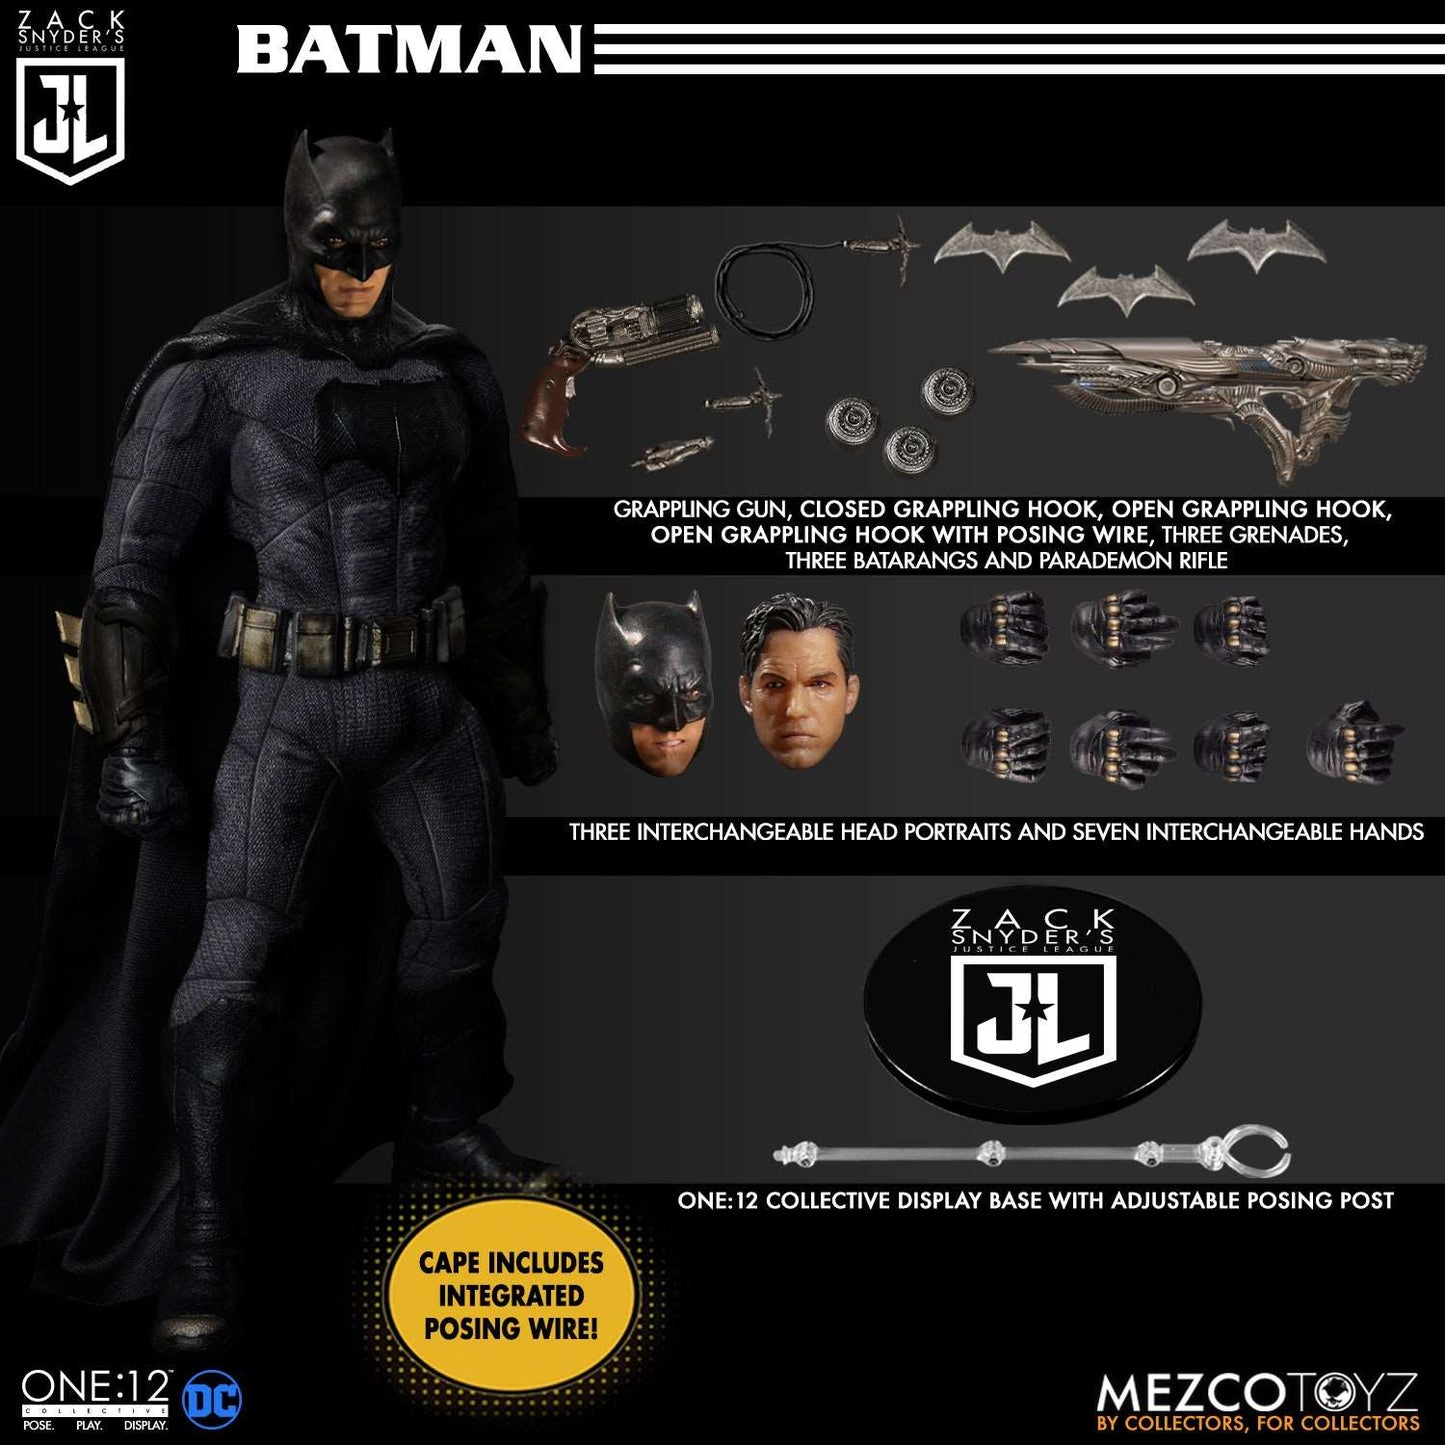 Mezco One Twelfth Collective Zack Snyder’s Justice League Deluxe Steel Boxed Set Batman figure and accessories